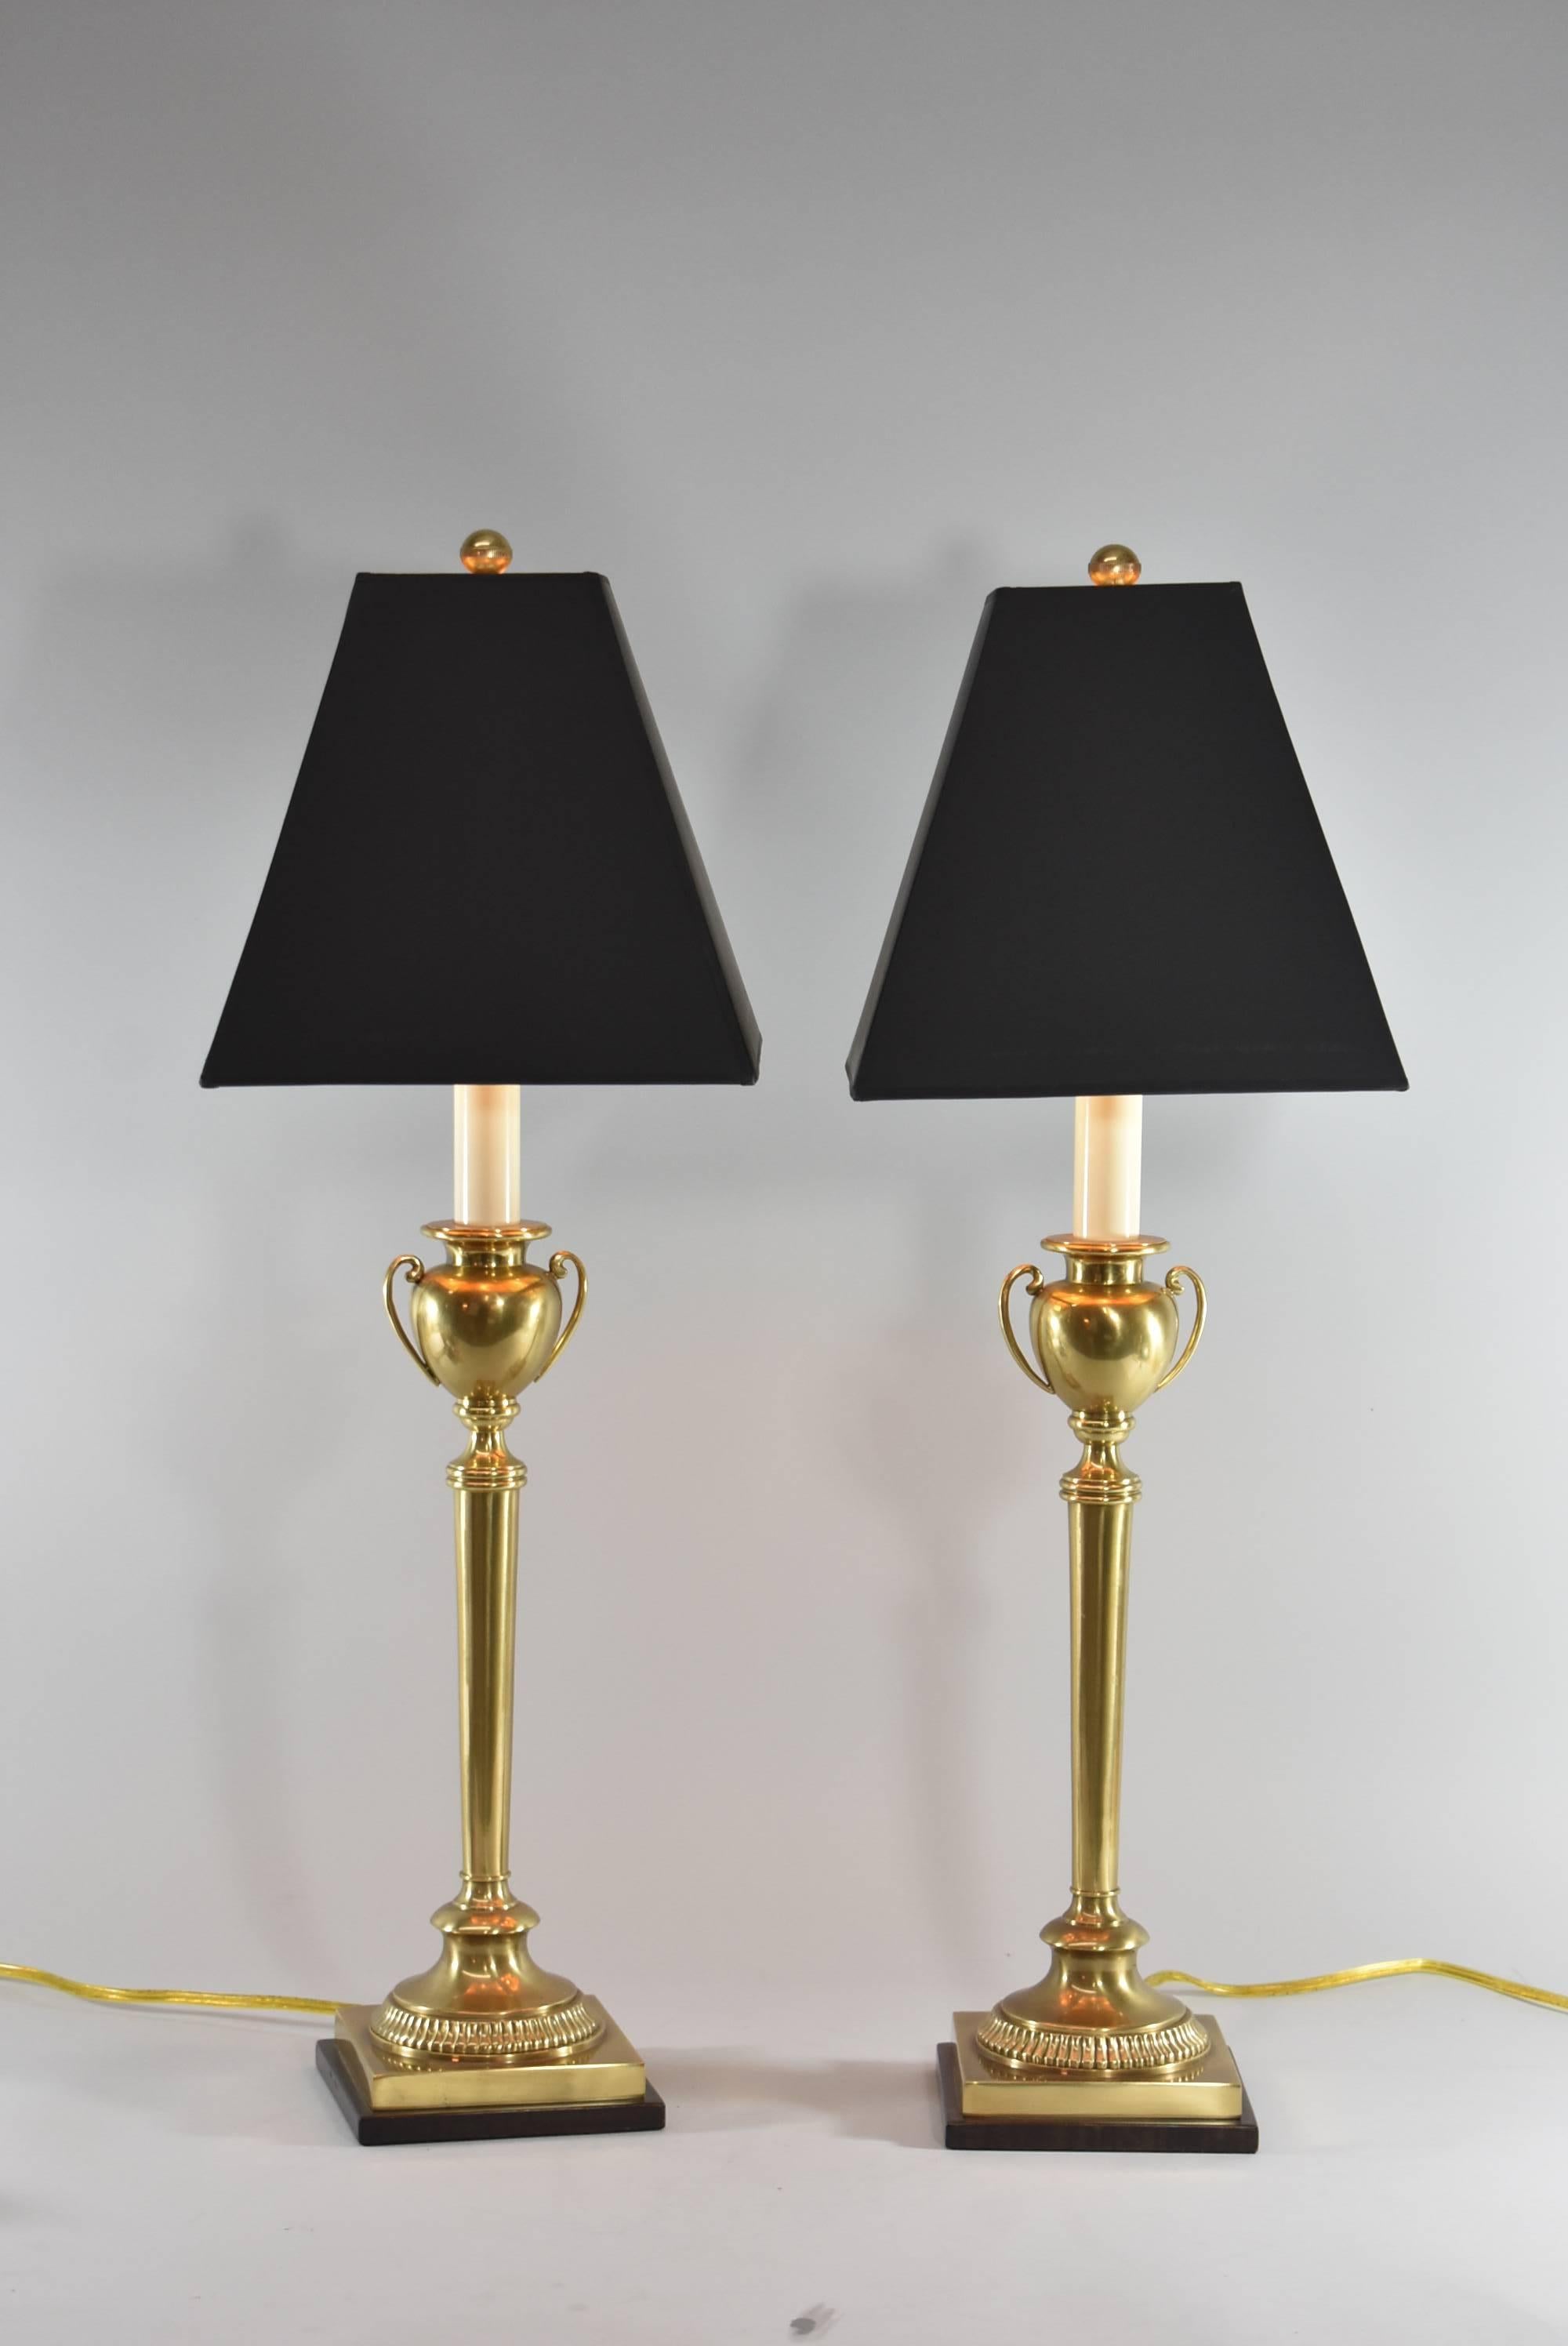 A very attractive pair of table lamps by Frederick Cooper. They feature a slender brass base with an urn form centre and a bronze colored metal base. The dimensions are 30